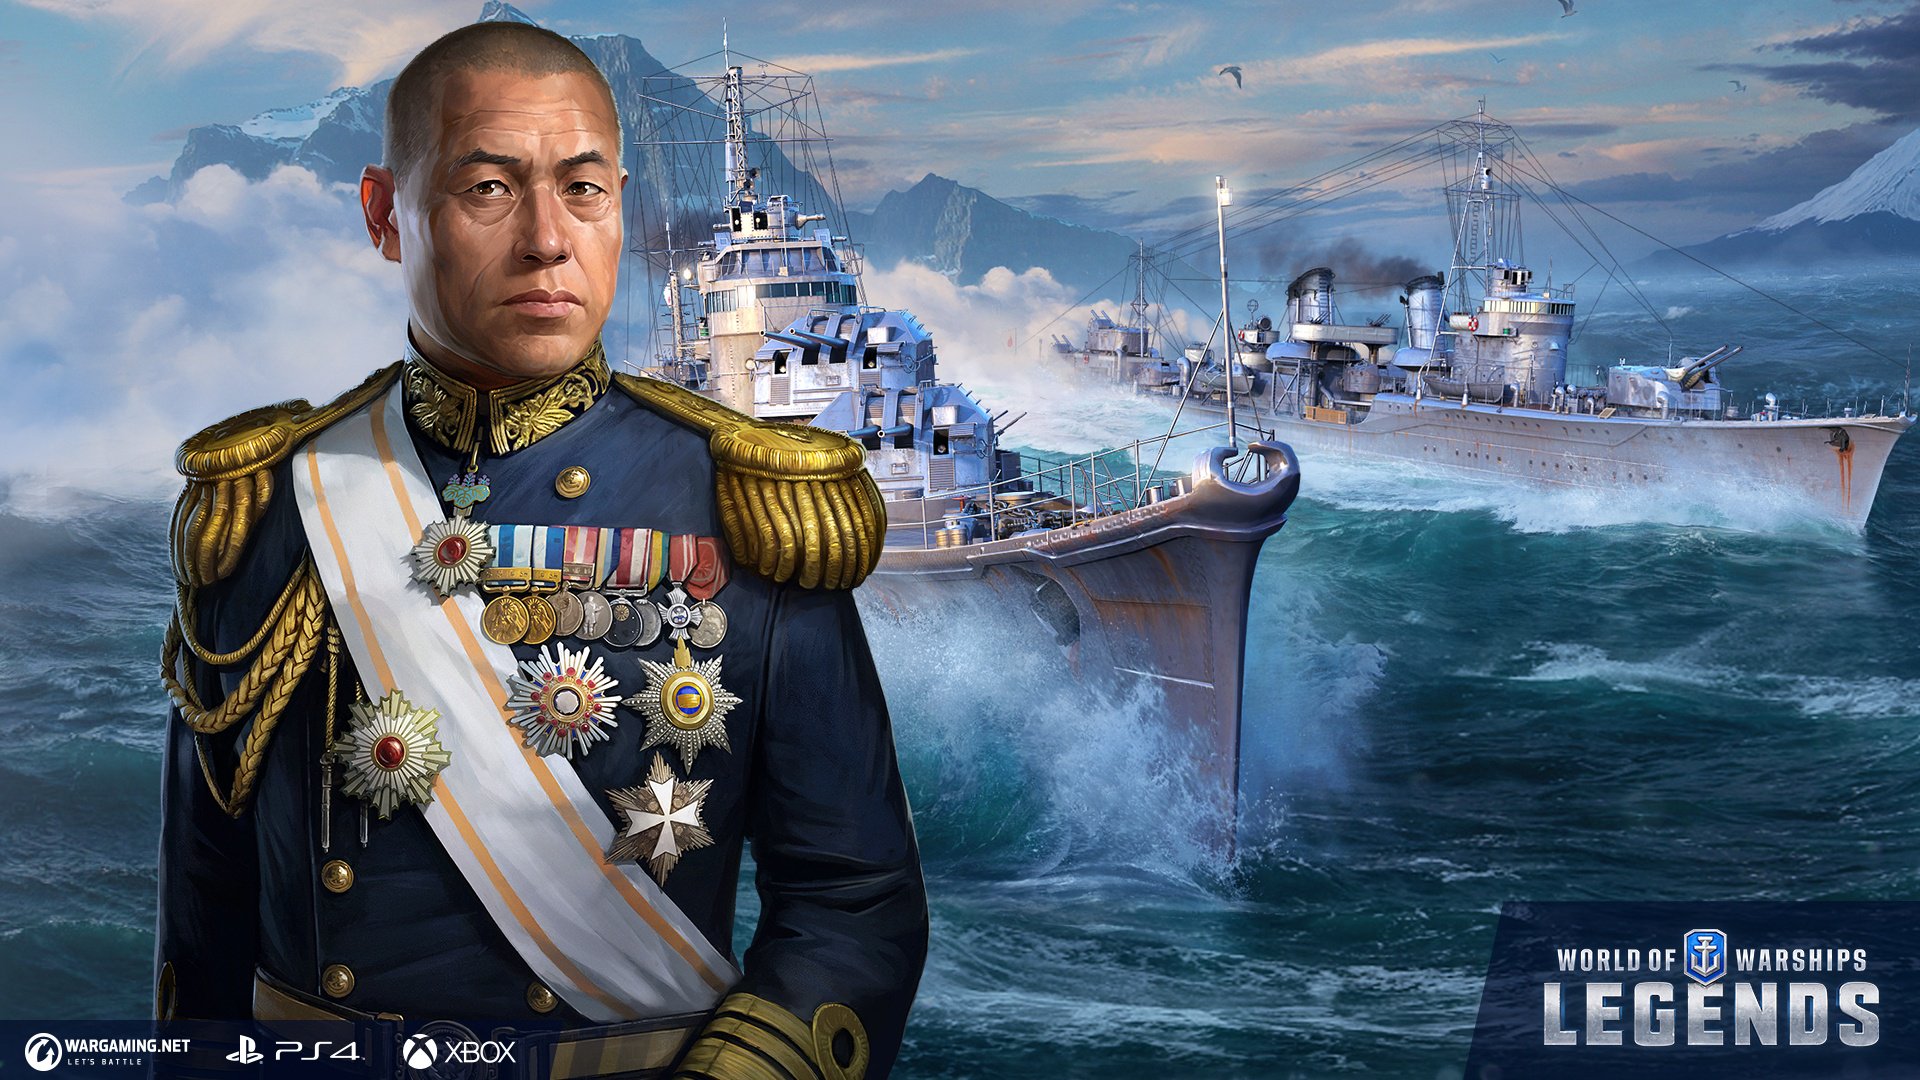 World of Warships: Legends on X: Isoroku Yamamoto was an inspiring example  of an exceptionally good tactician and a great warrior. Retweet if you  would like this Legendary commander to help you